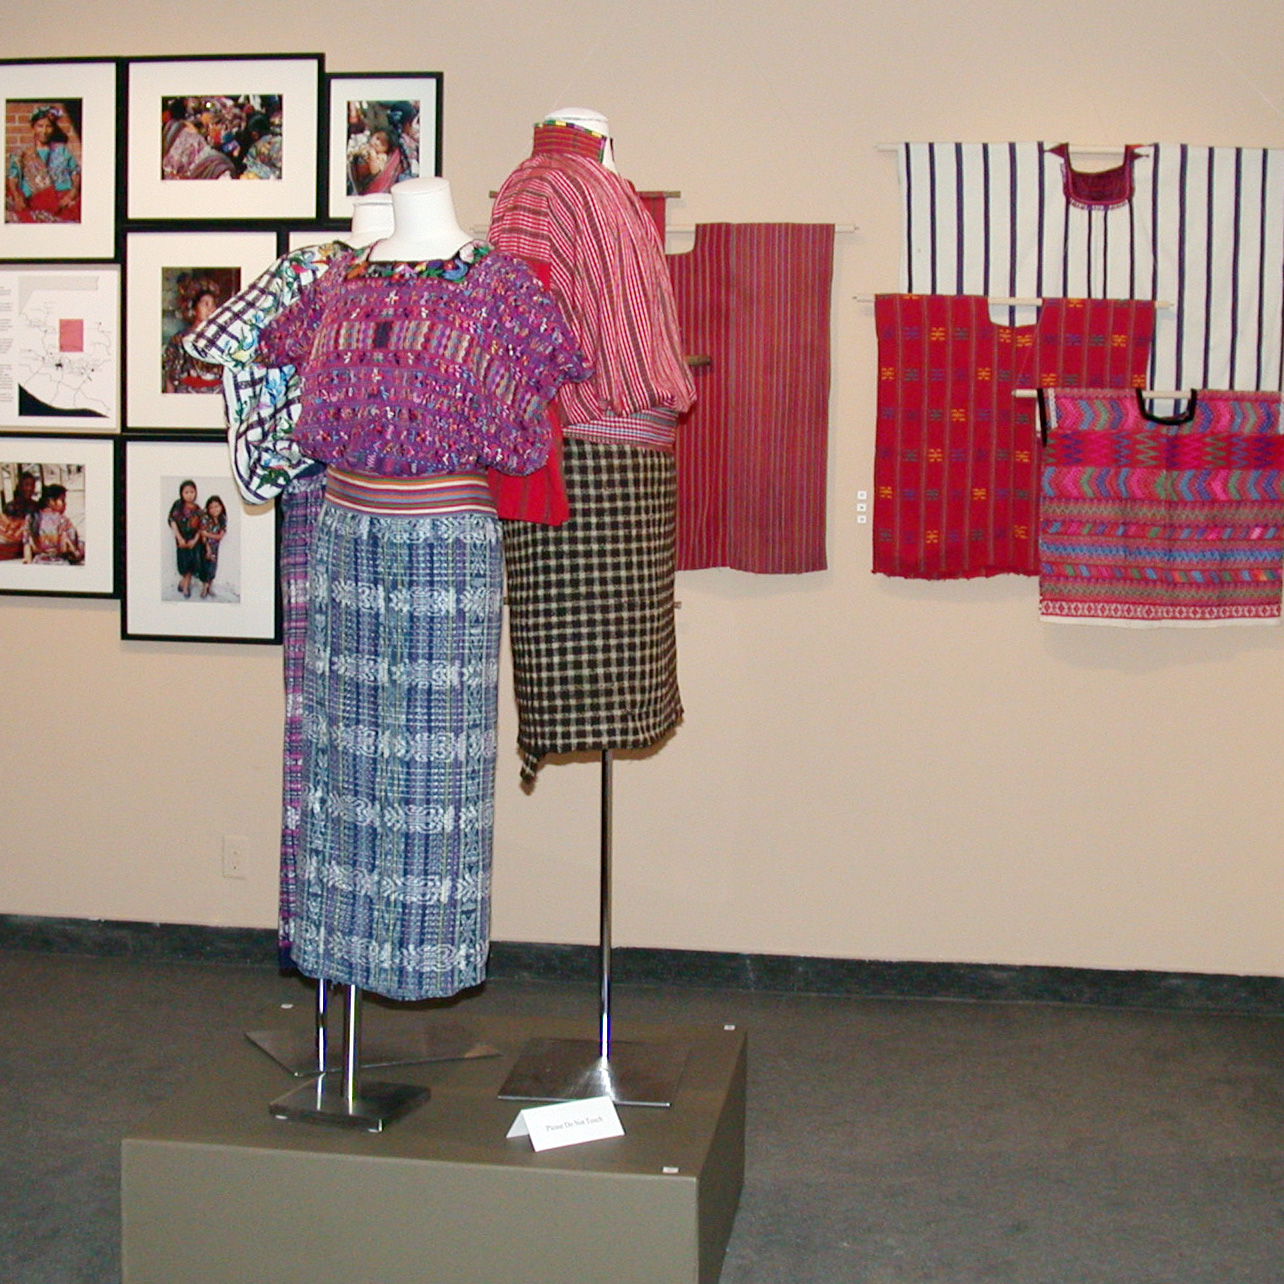 Maya Textiles From The Guatemalan Highlands textiles, photos, and clothing on display